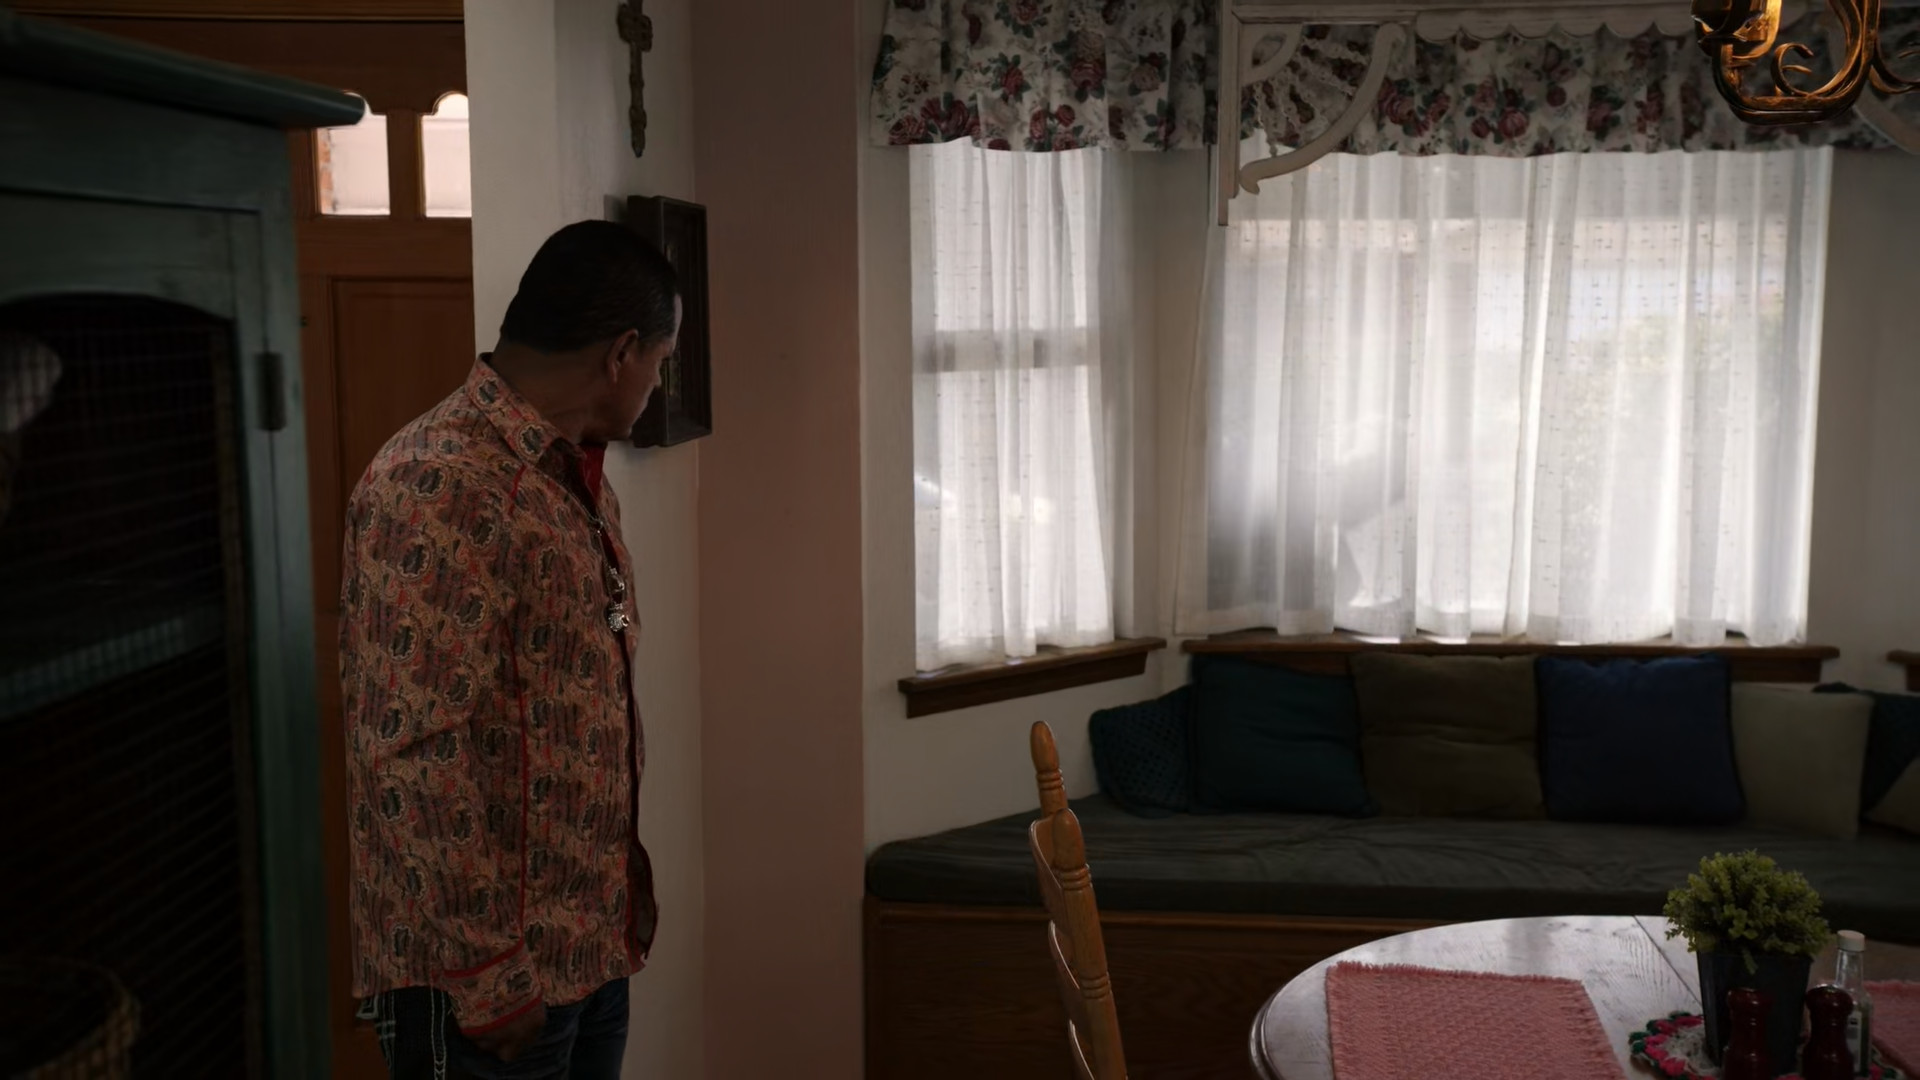 Tuco watches Saul through the window